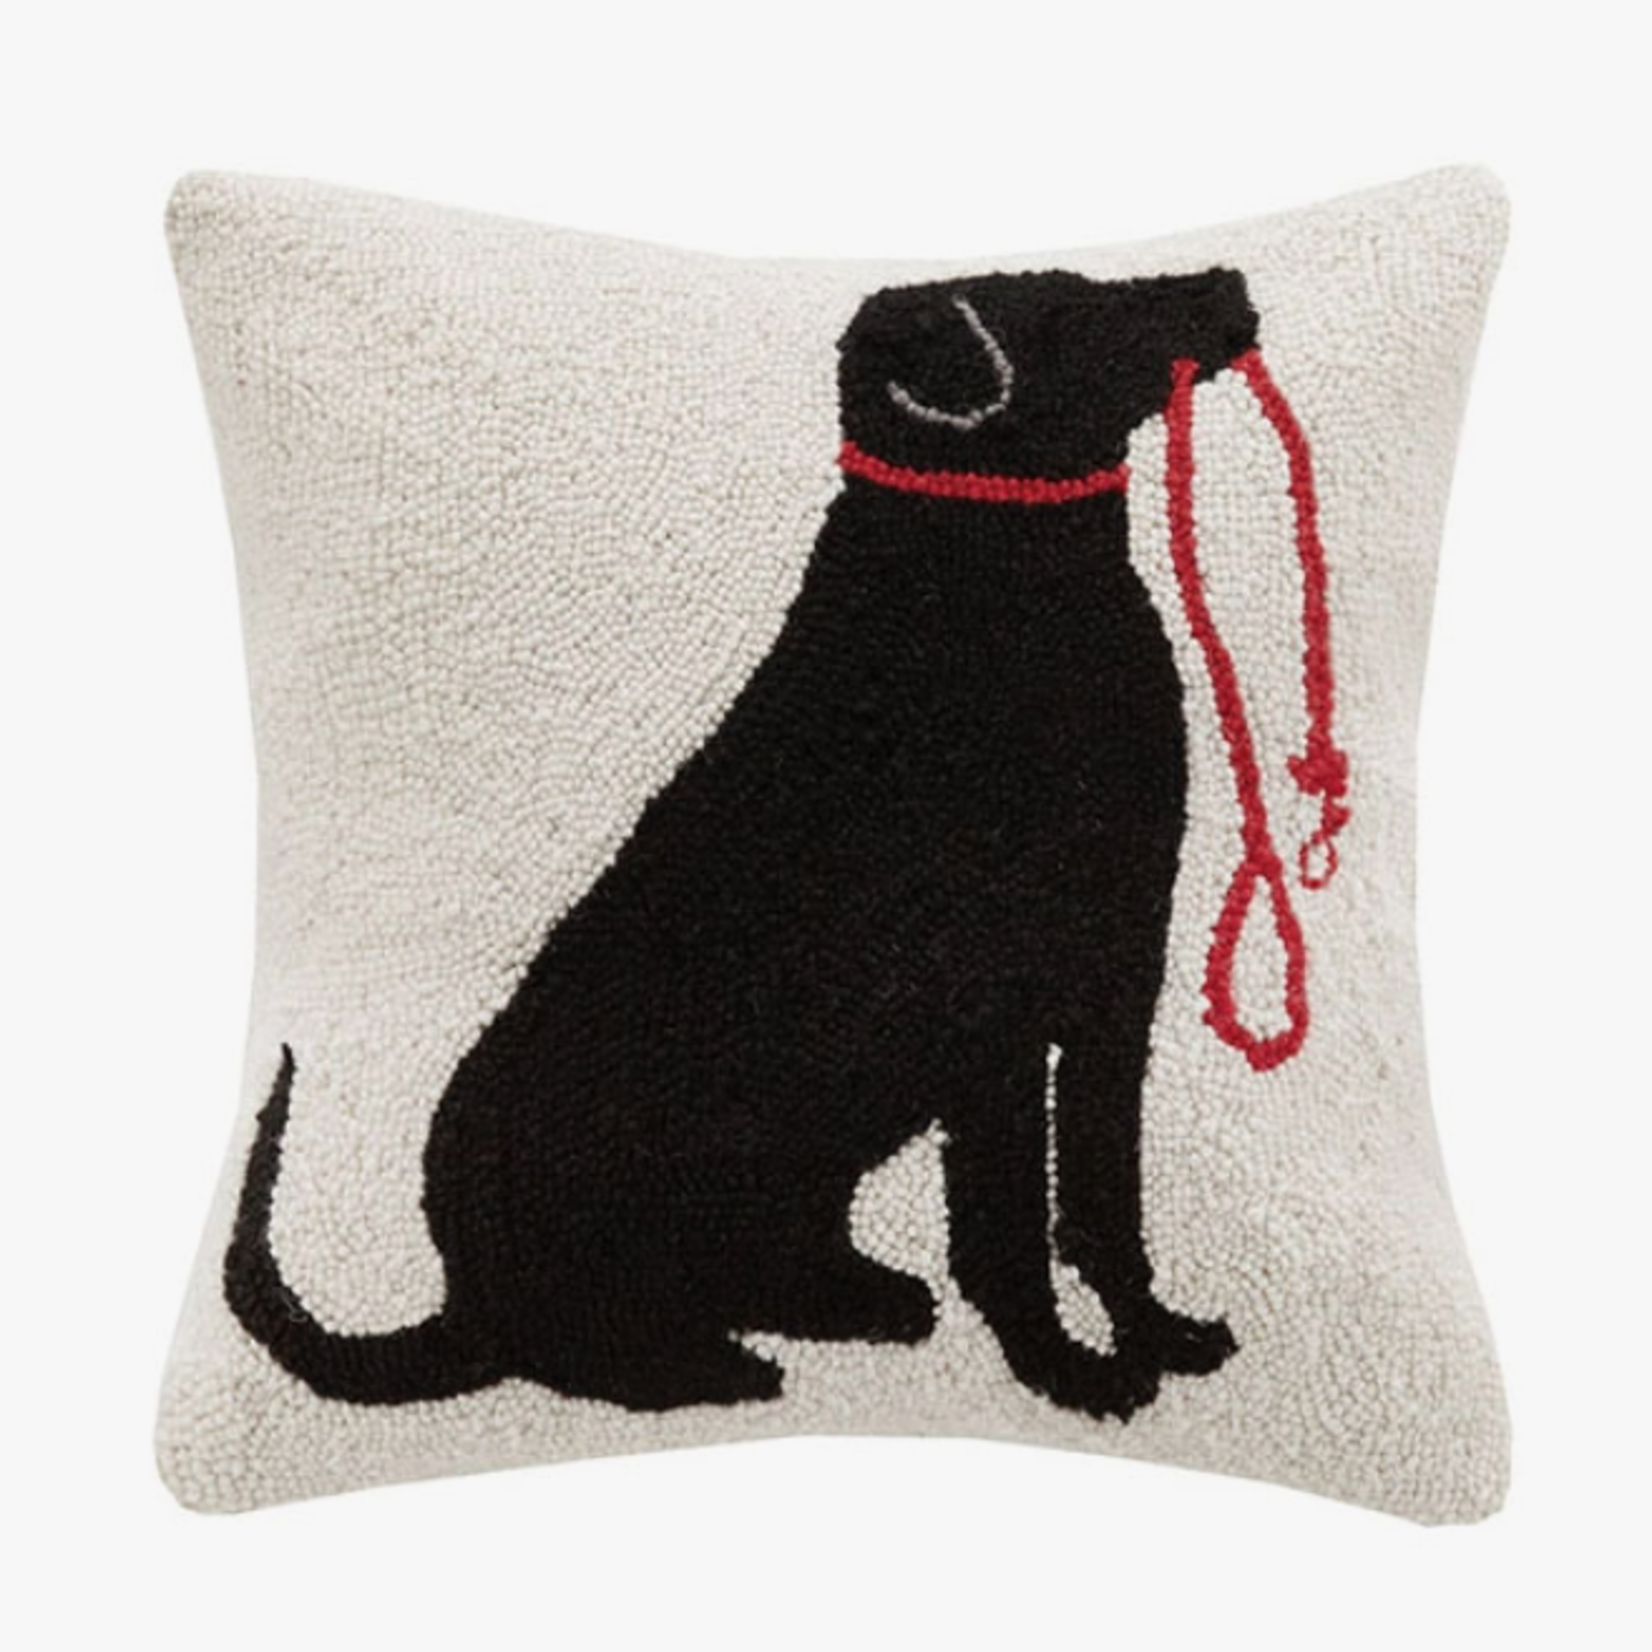 Pillows - Hooked Dog Ready For Walk Pillow